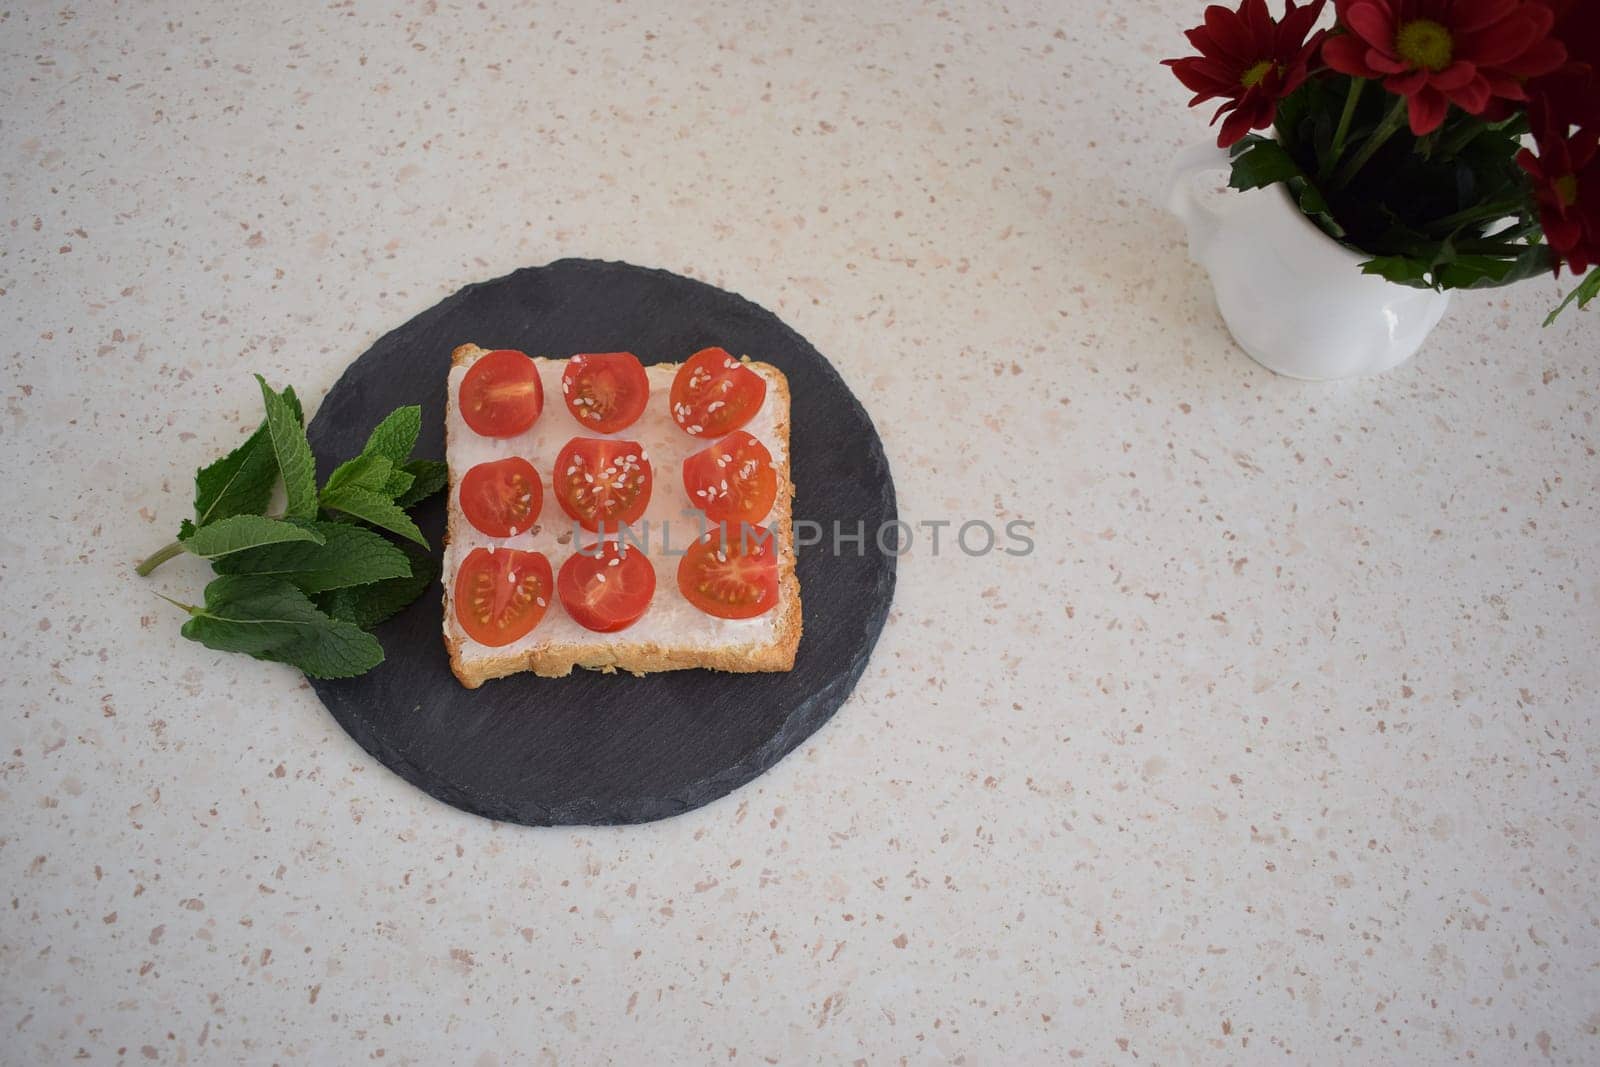 Healthy breakfast toast with tomatoes, ricotta and herbs.